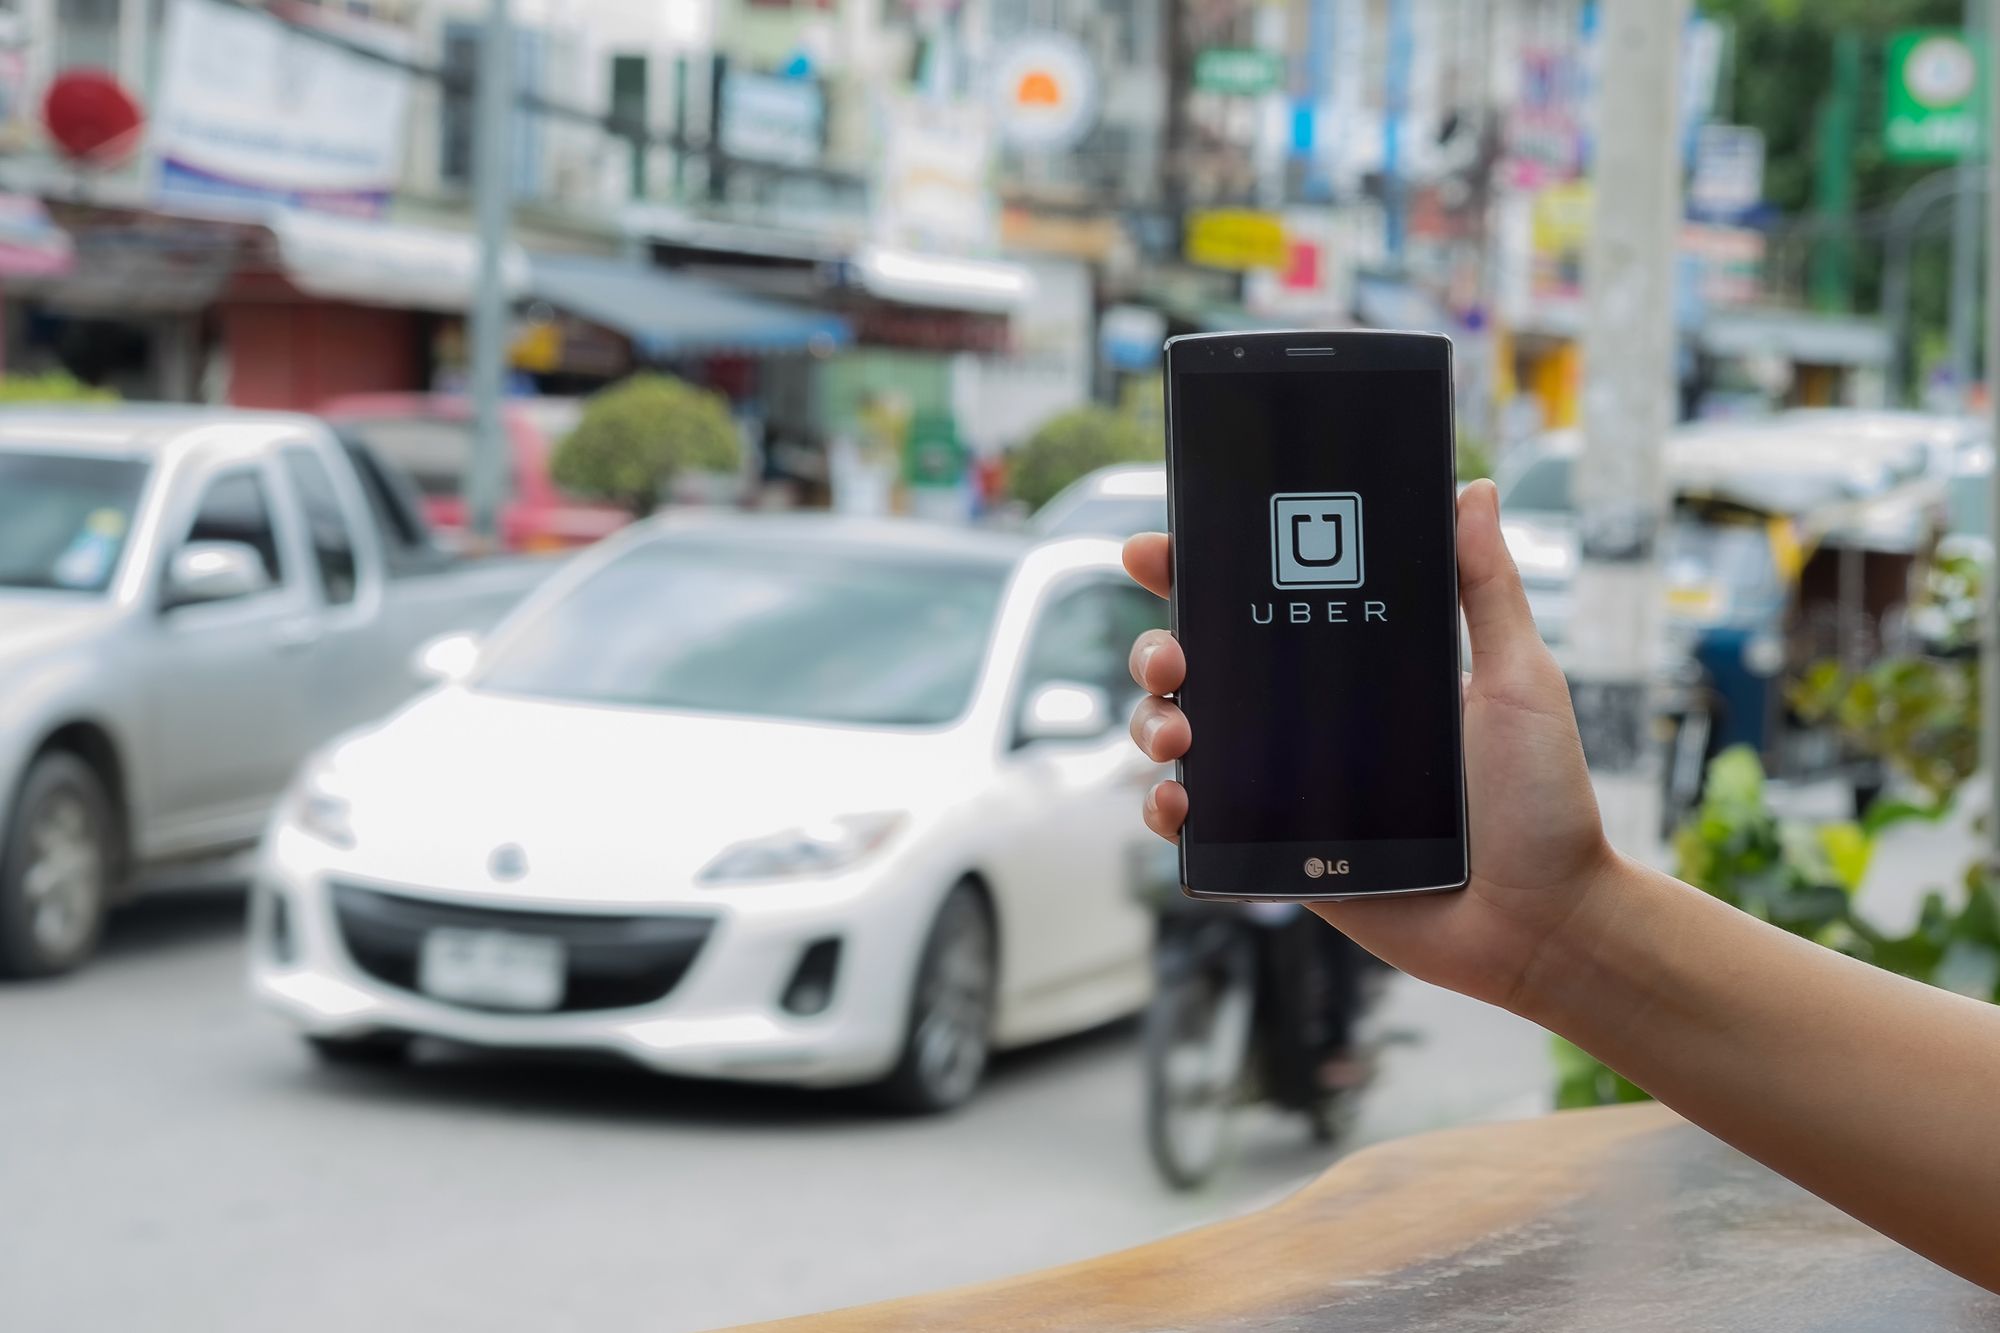 CHIANG MAI,THAILAND - JULY 17, 2016 : A man hand holding Uber app showing on LG G4 on road and red car, Uber is smartphone app-based transportation network.